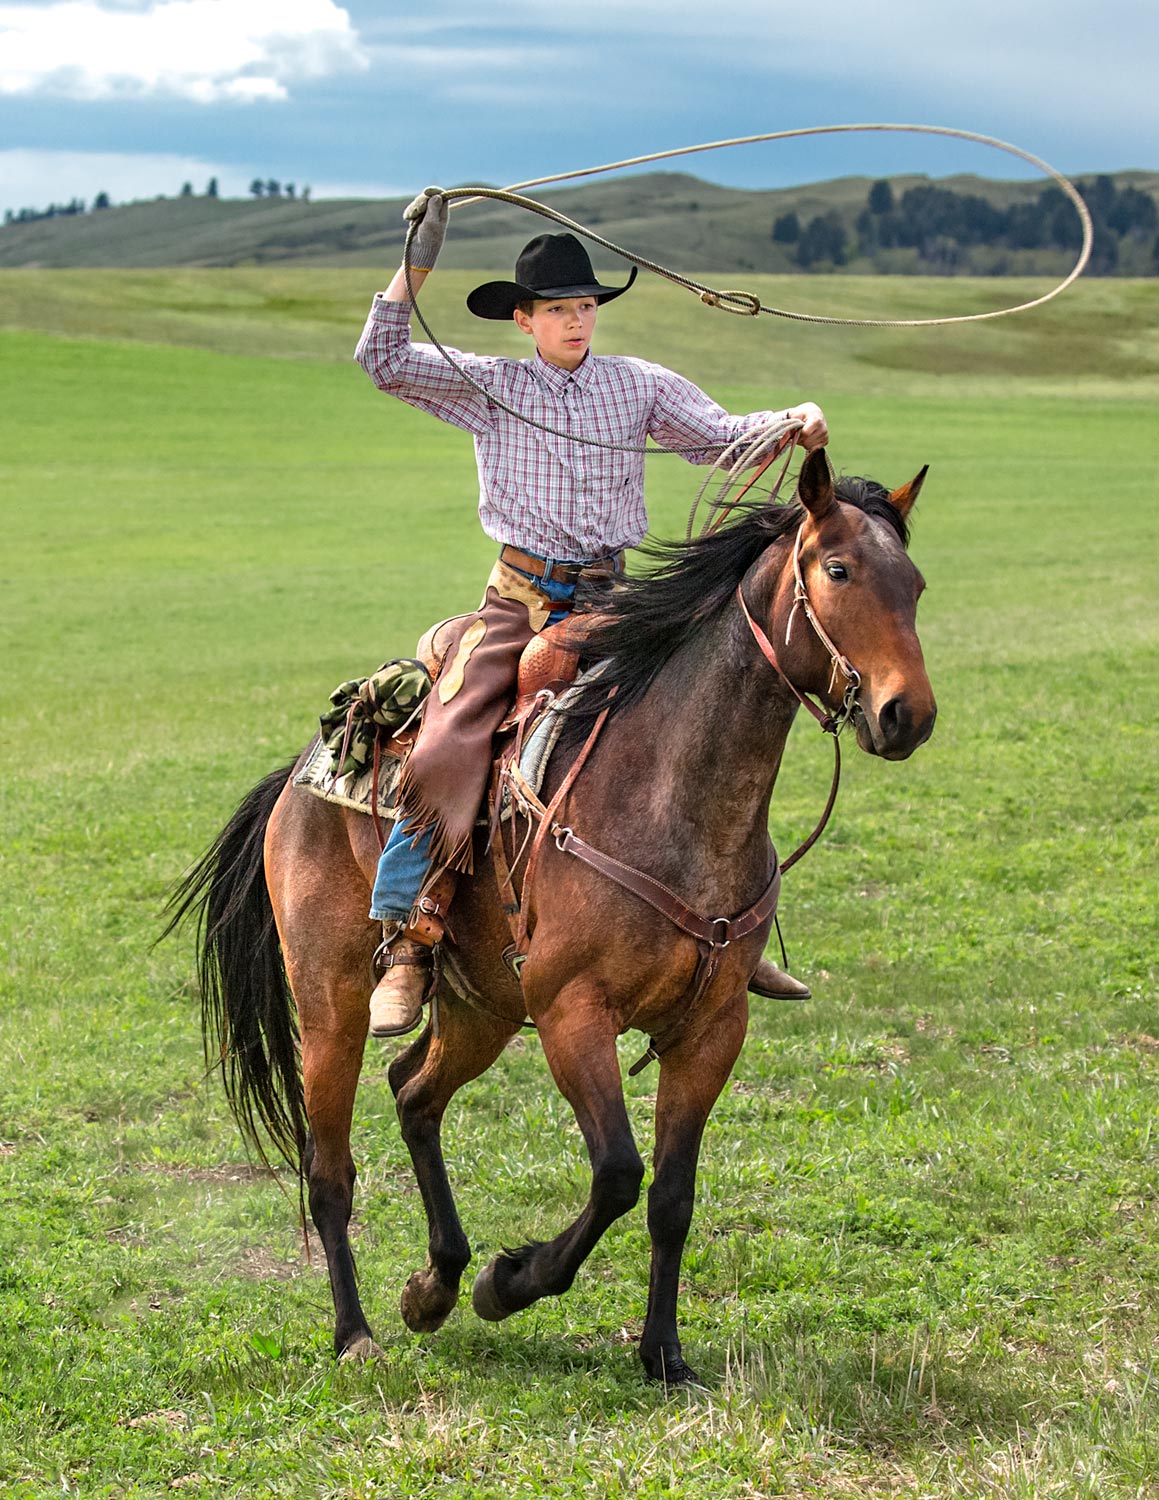 A young cowboy roping cattle on a ranch near Cleveland, Montana.&nbsp;→ License Photo